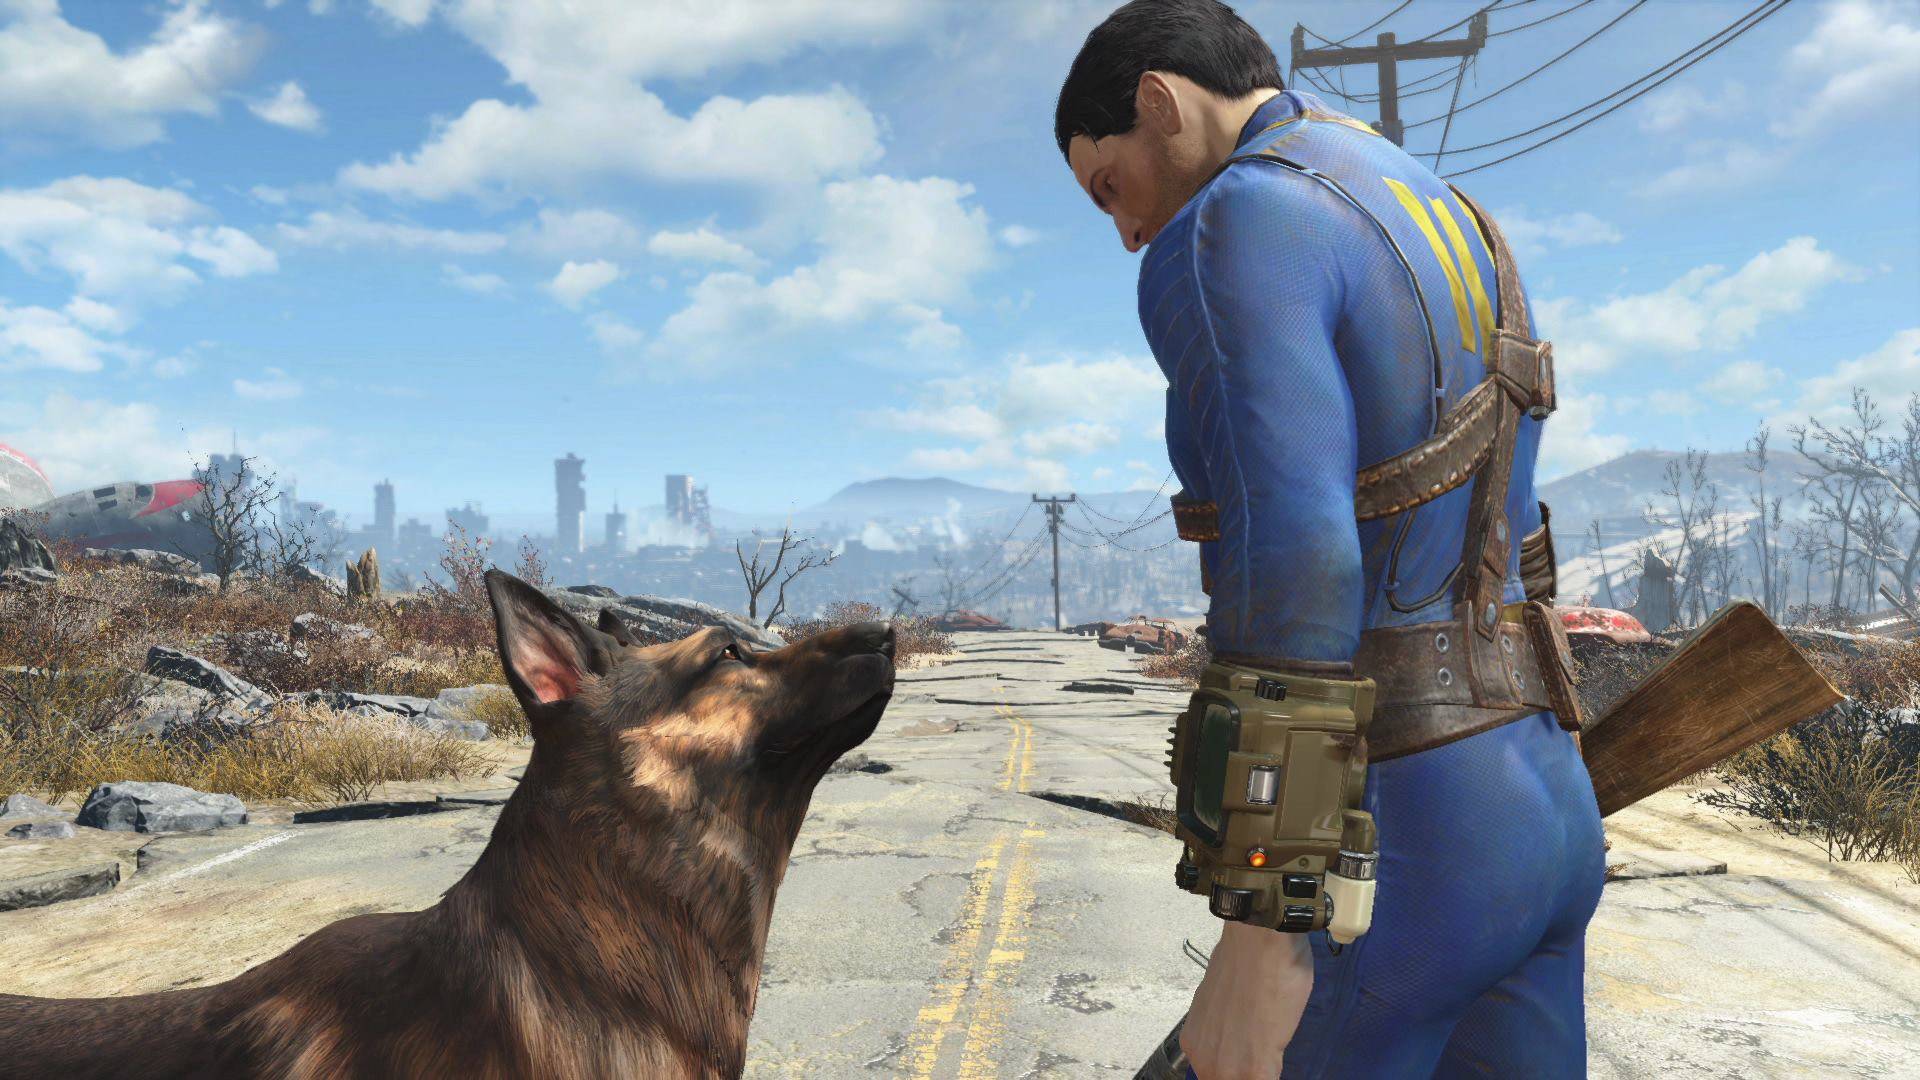 Apocalyptic Games versus reality - Dealing With the “Fallout”